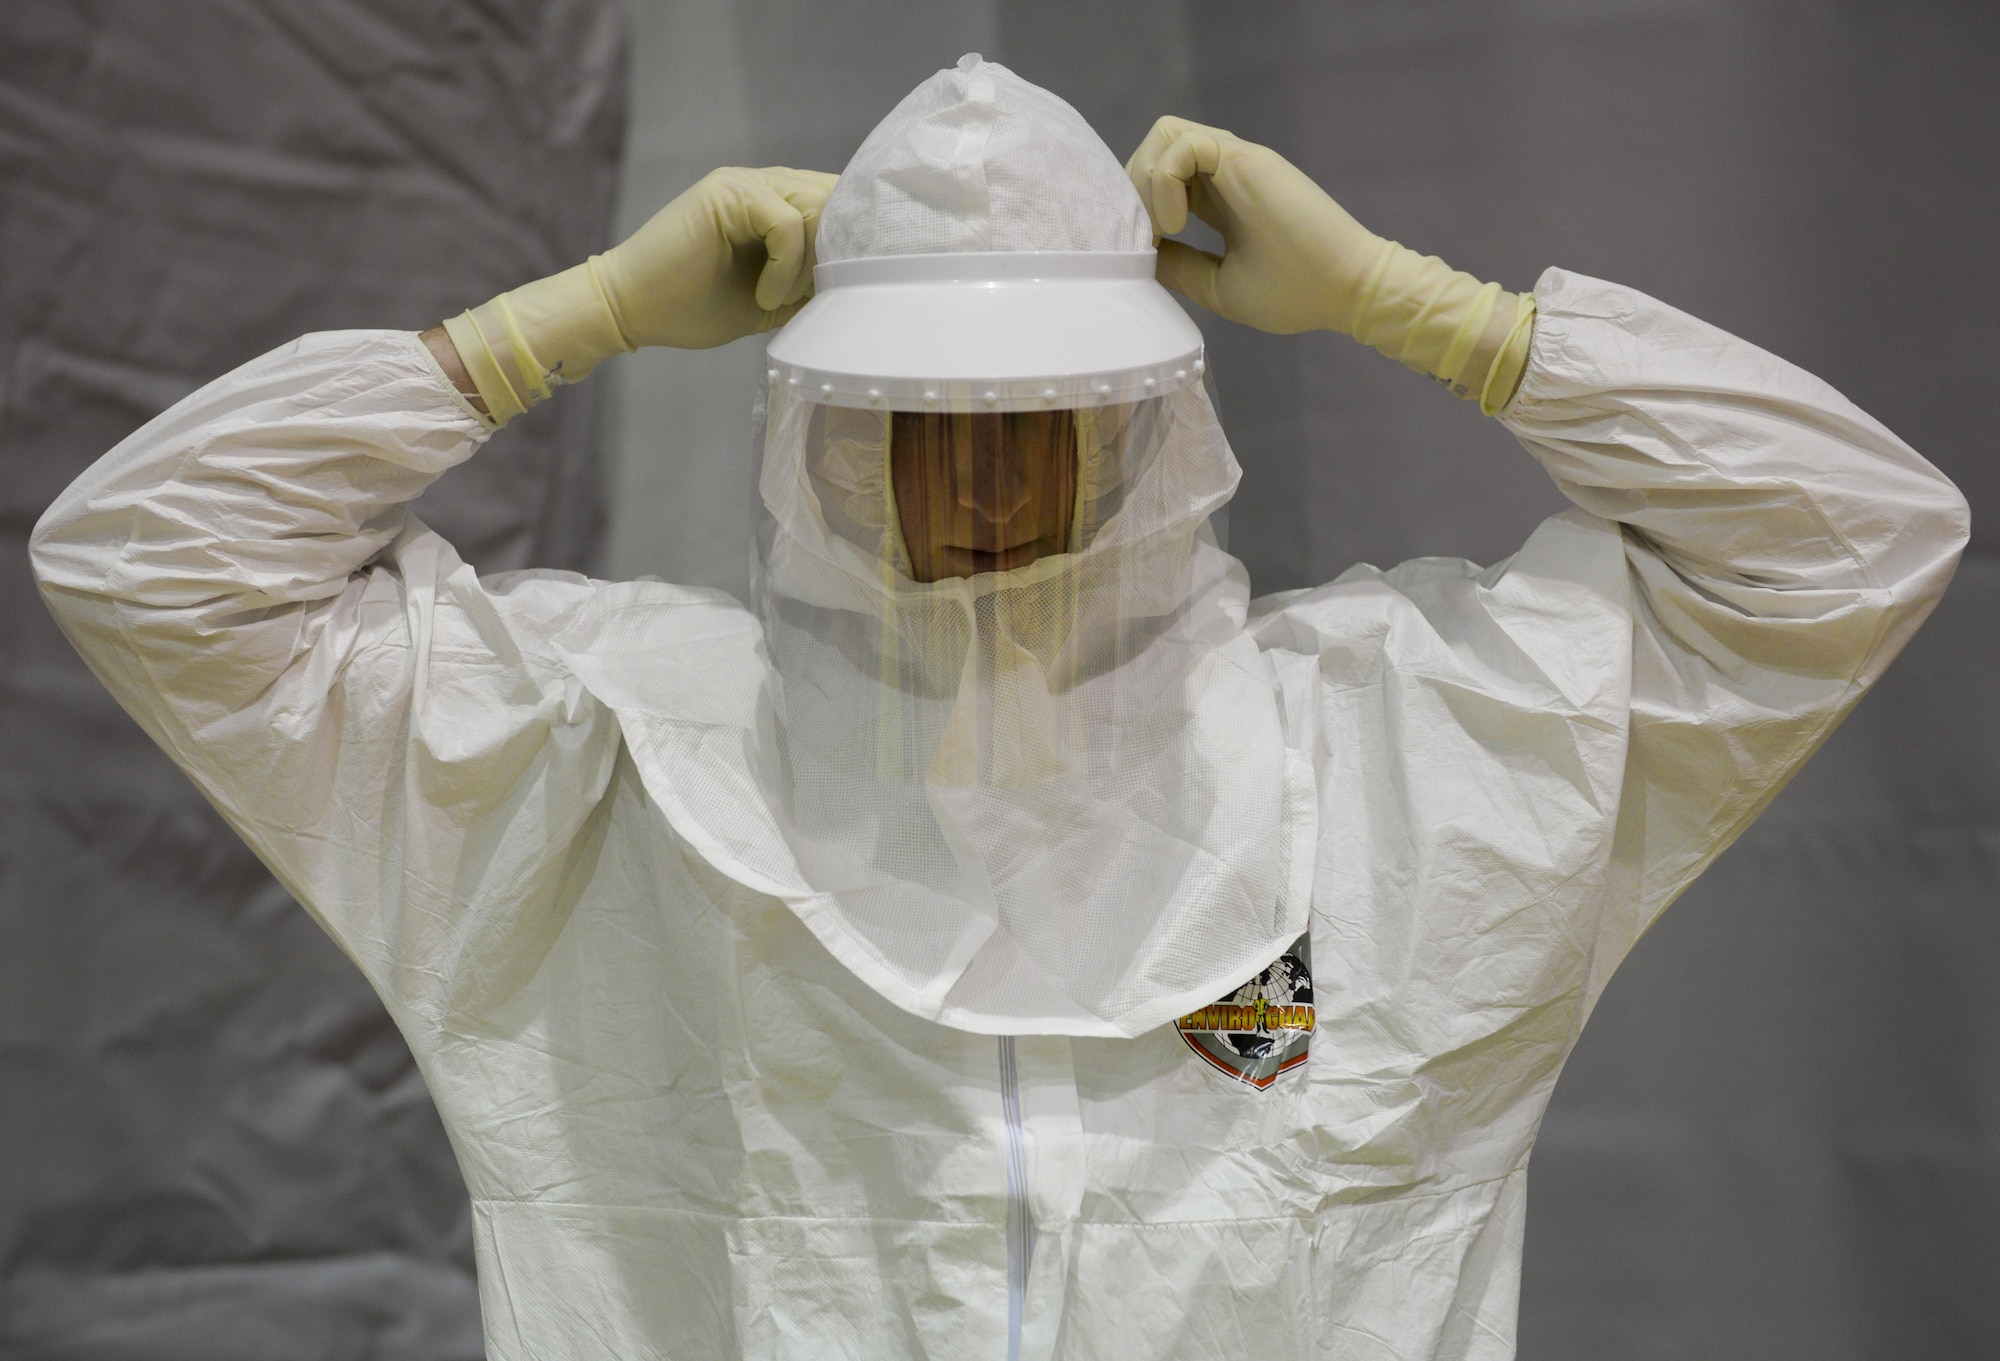 Airman 1st Class Brandon Culpan, 1st Special Operations Medical Group health service technician, dons personal protective equipment during a disease containment exercise at Hurlburt Field, Fla., Feb. 4, 2015. The exercise focused on a disease outbreak that is potentially contagious and relevant to what is happening in the real world. (U.S. Air Force photo Senior Airman Meagan Schutter/Released)